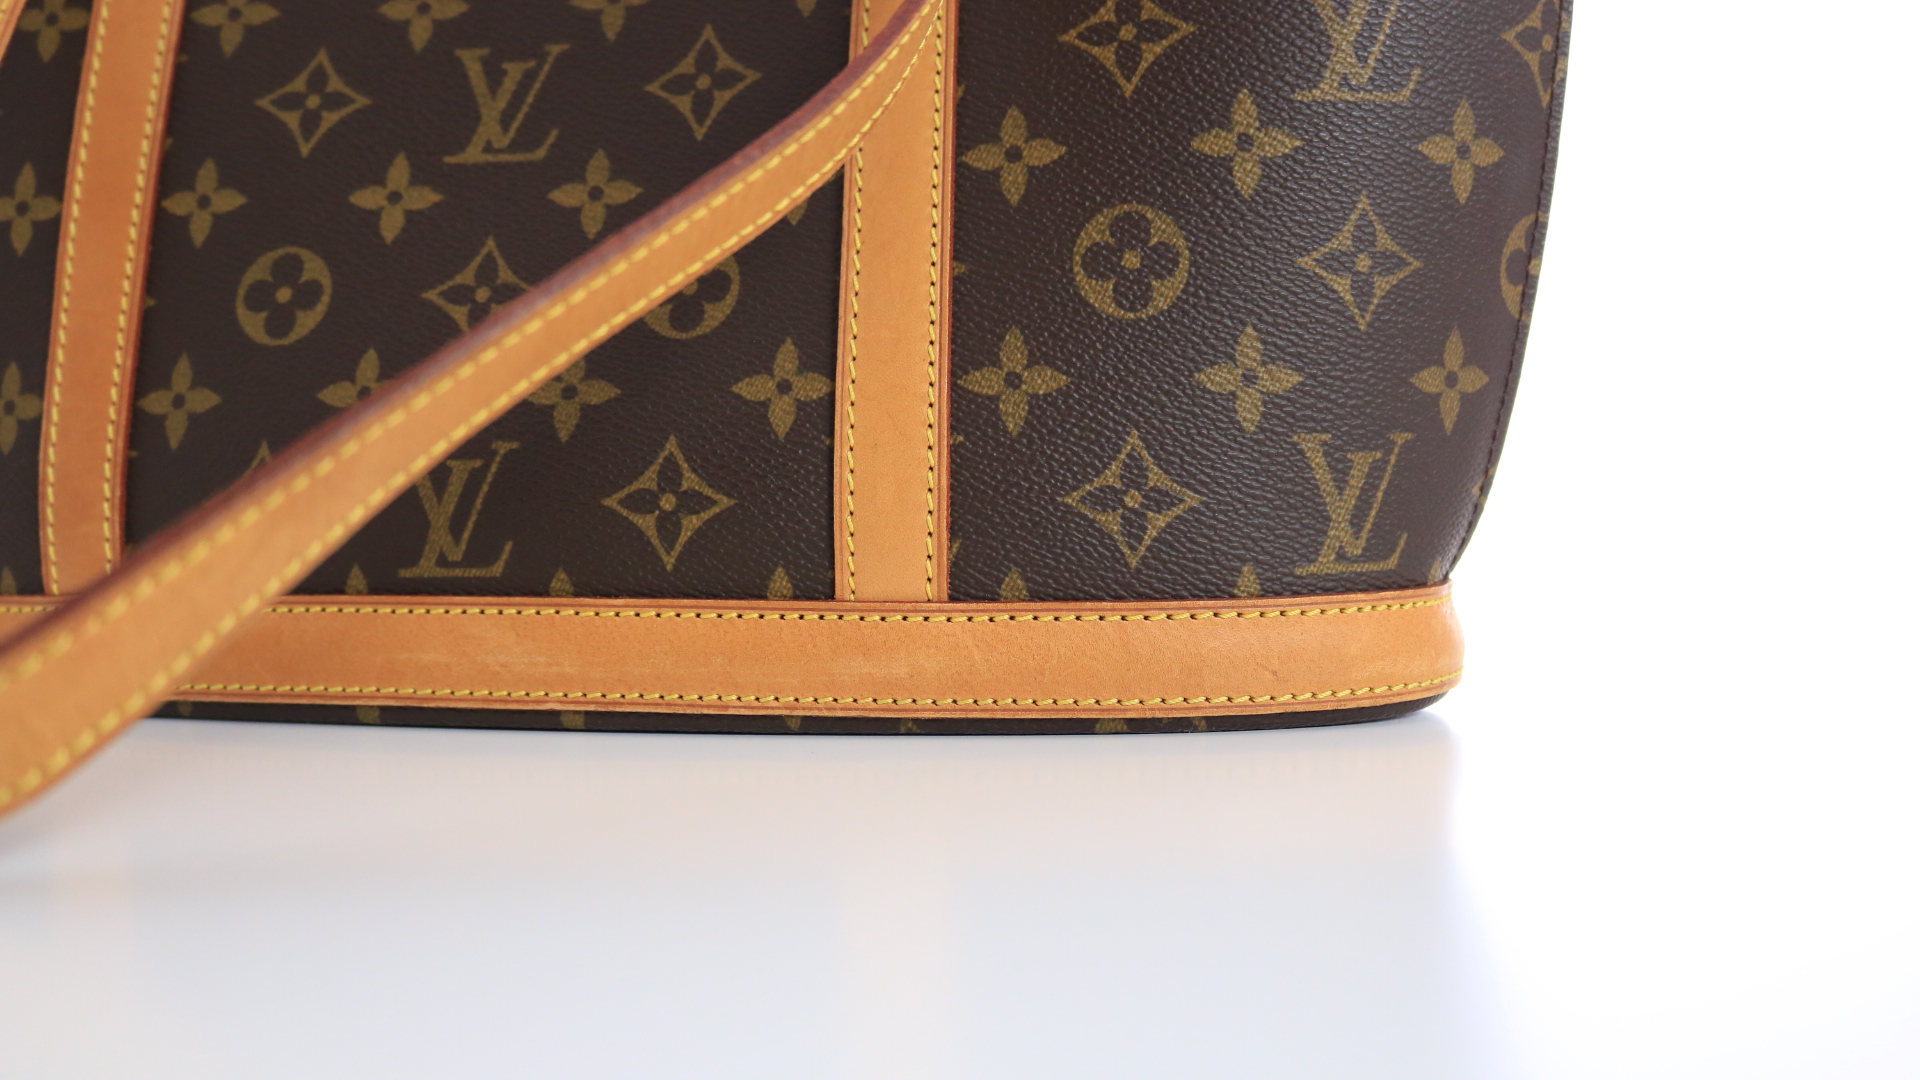 Louis Vuitton - Authenticated Babylone Handbag - Cloth Brown for Women, Good Condition